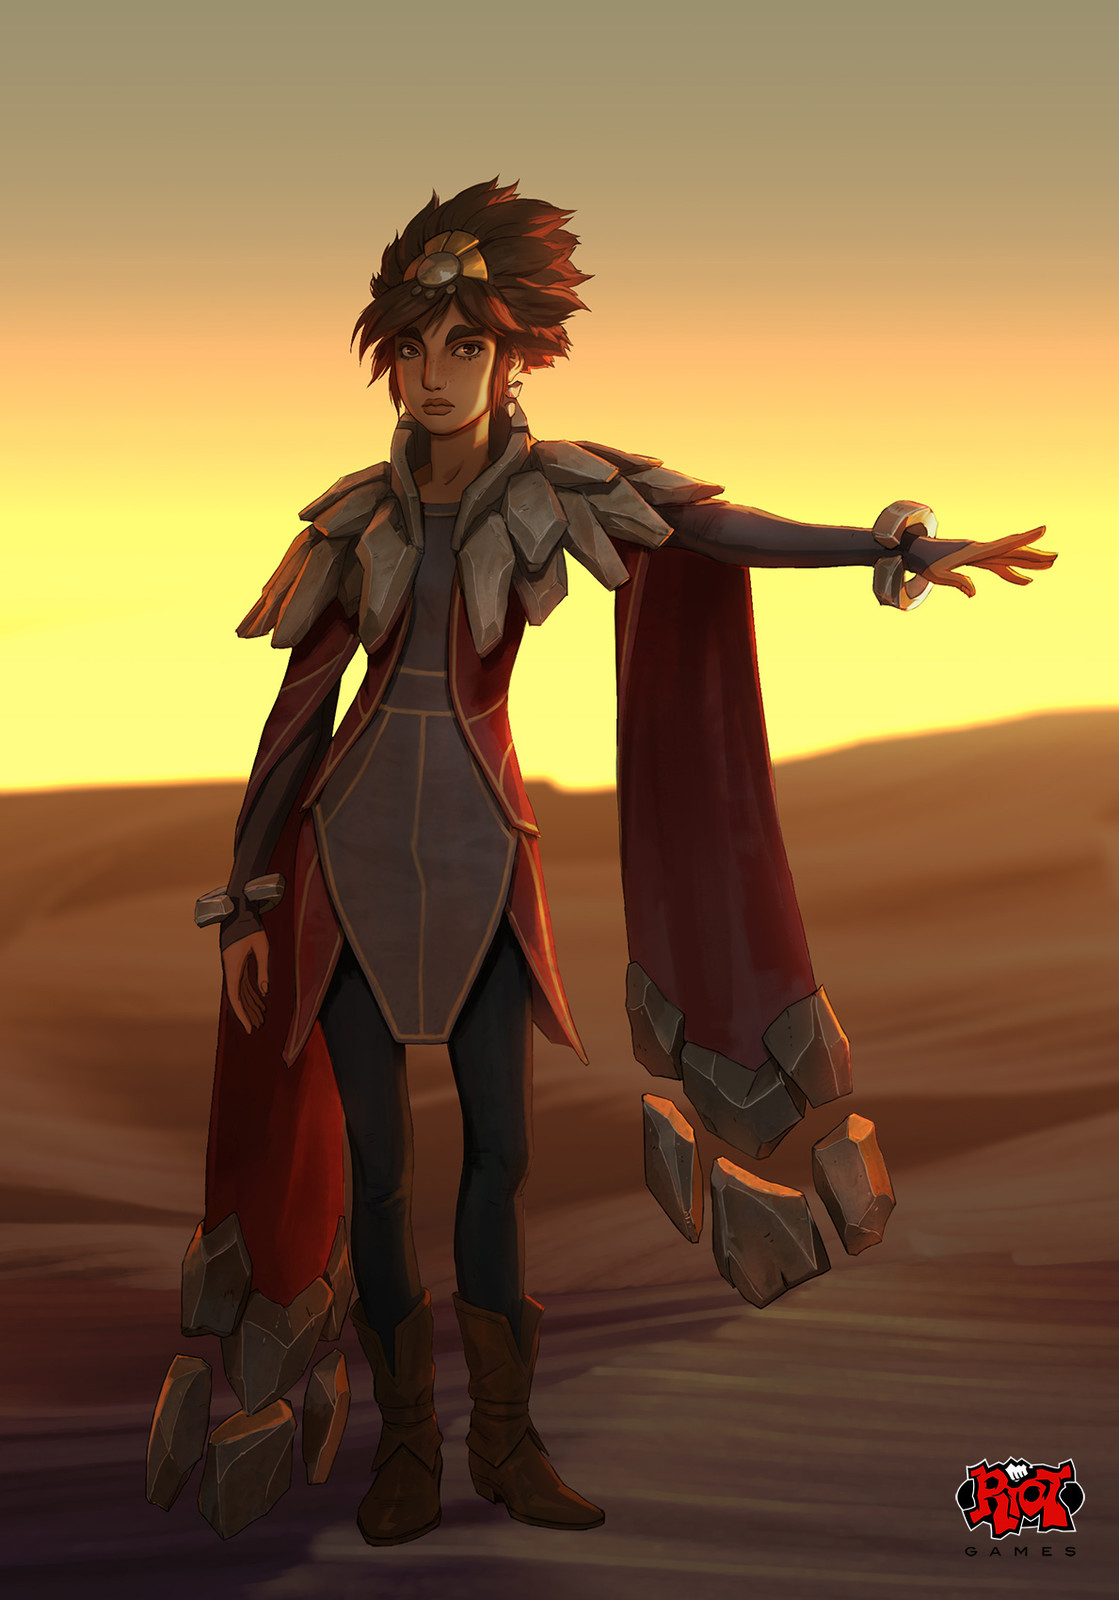 This concept is where we settled on the animation version/style for Taliyah.